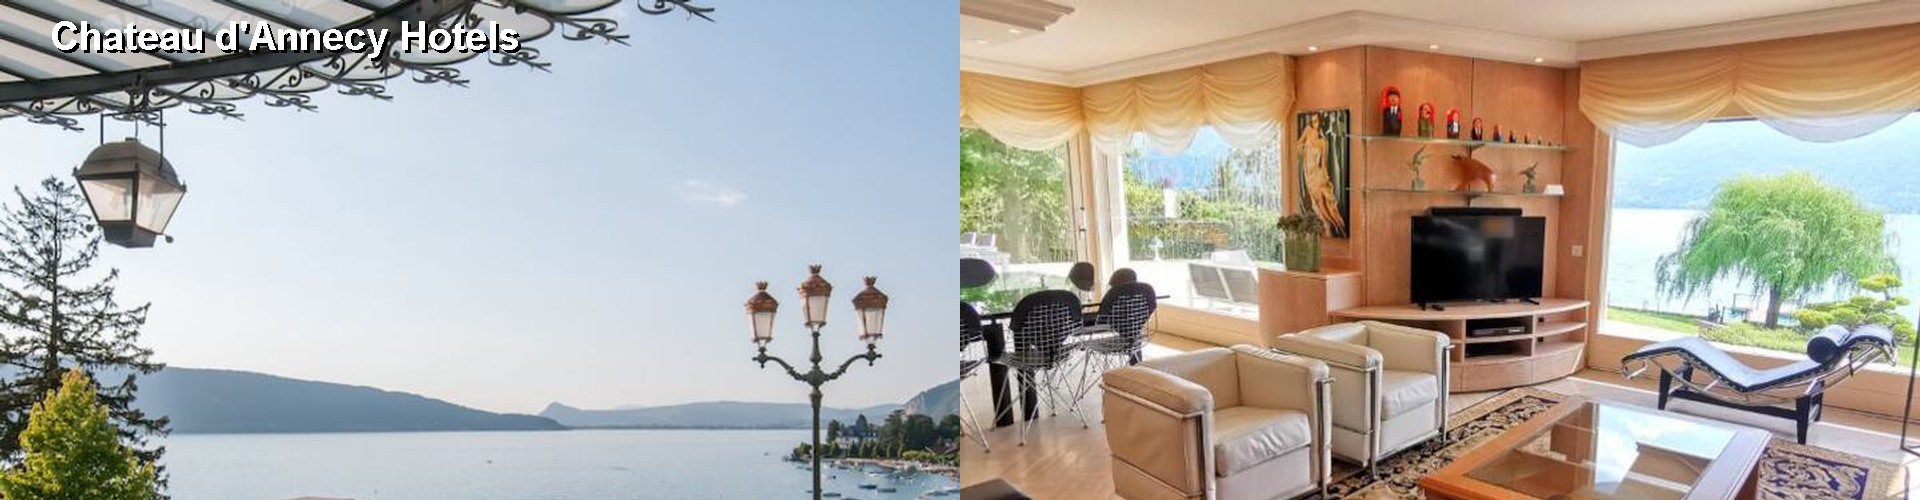 5 Best Hotels near Chateau d'Annecy